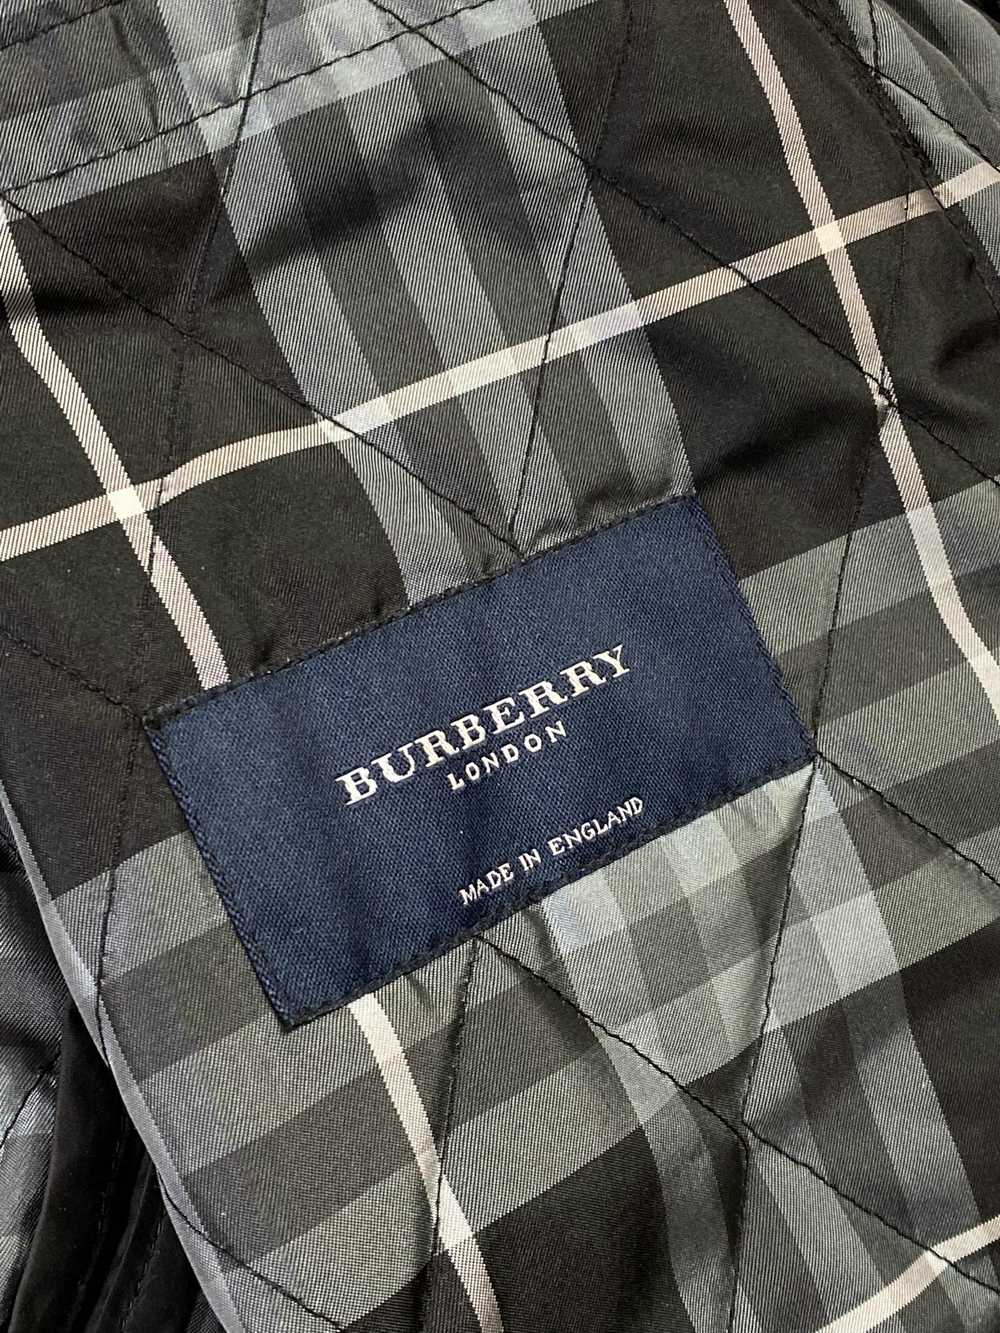 Burberry Burberry Quilted Jacket Nova Check - image 11